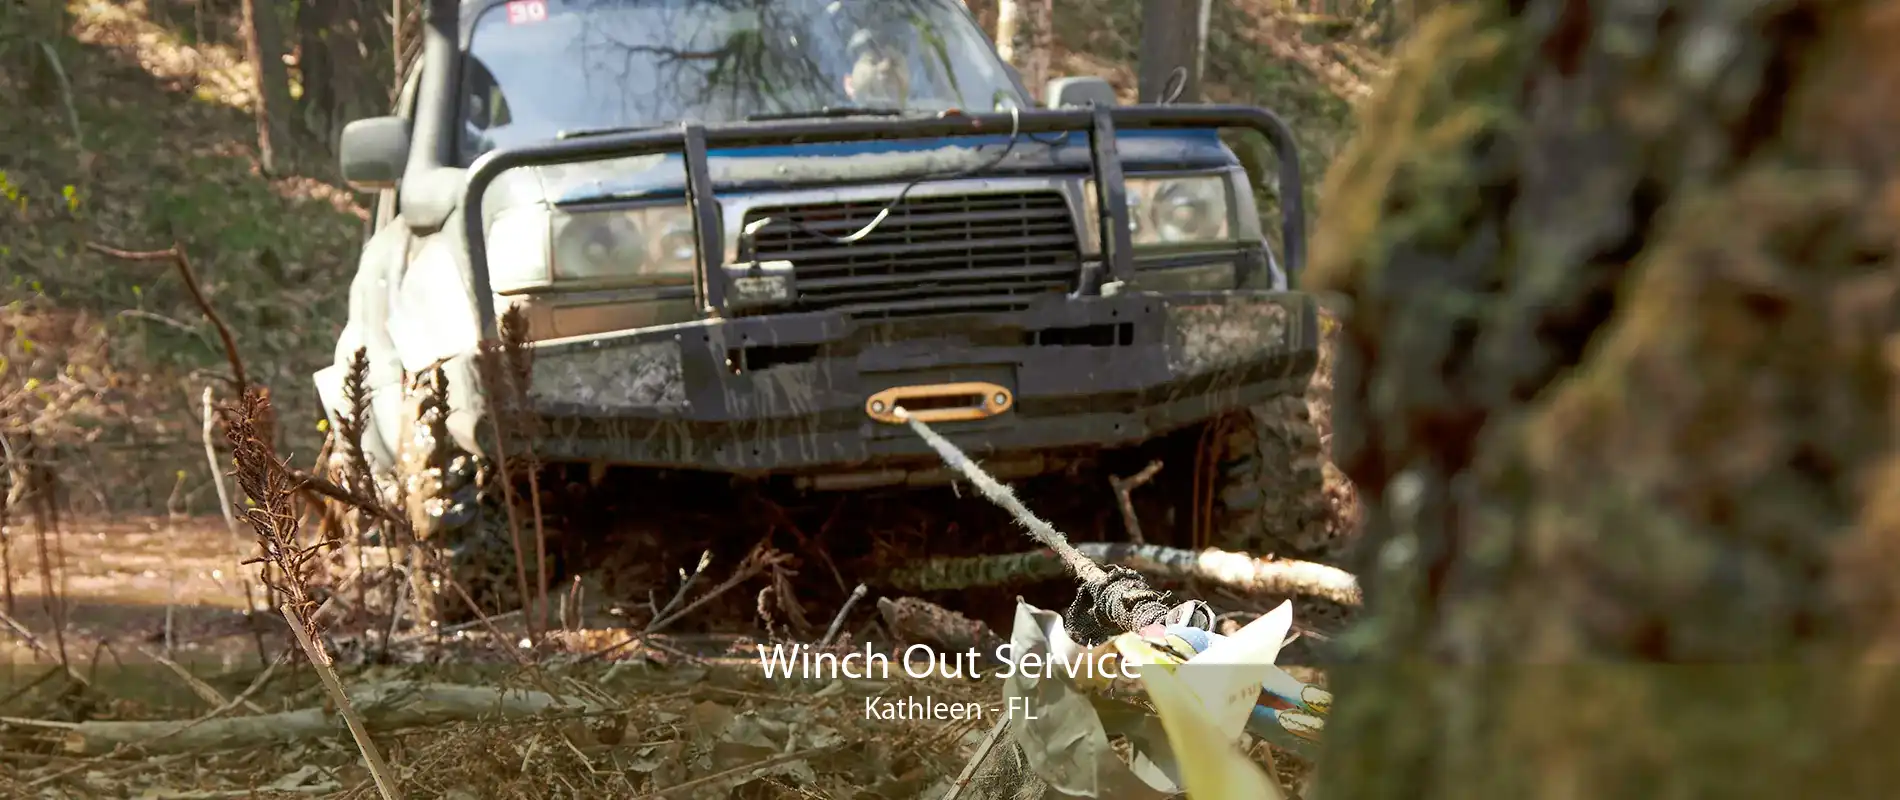 Winch Out Service Kathleen - FL